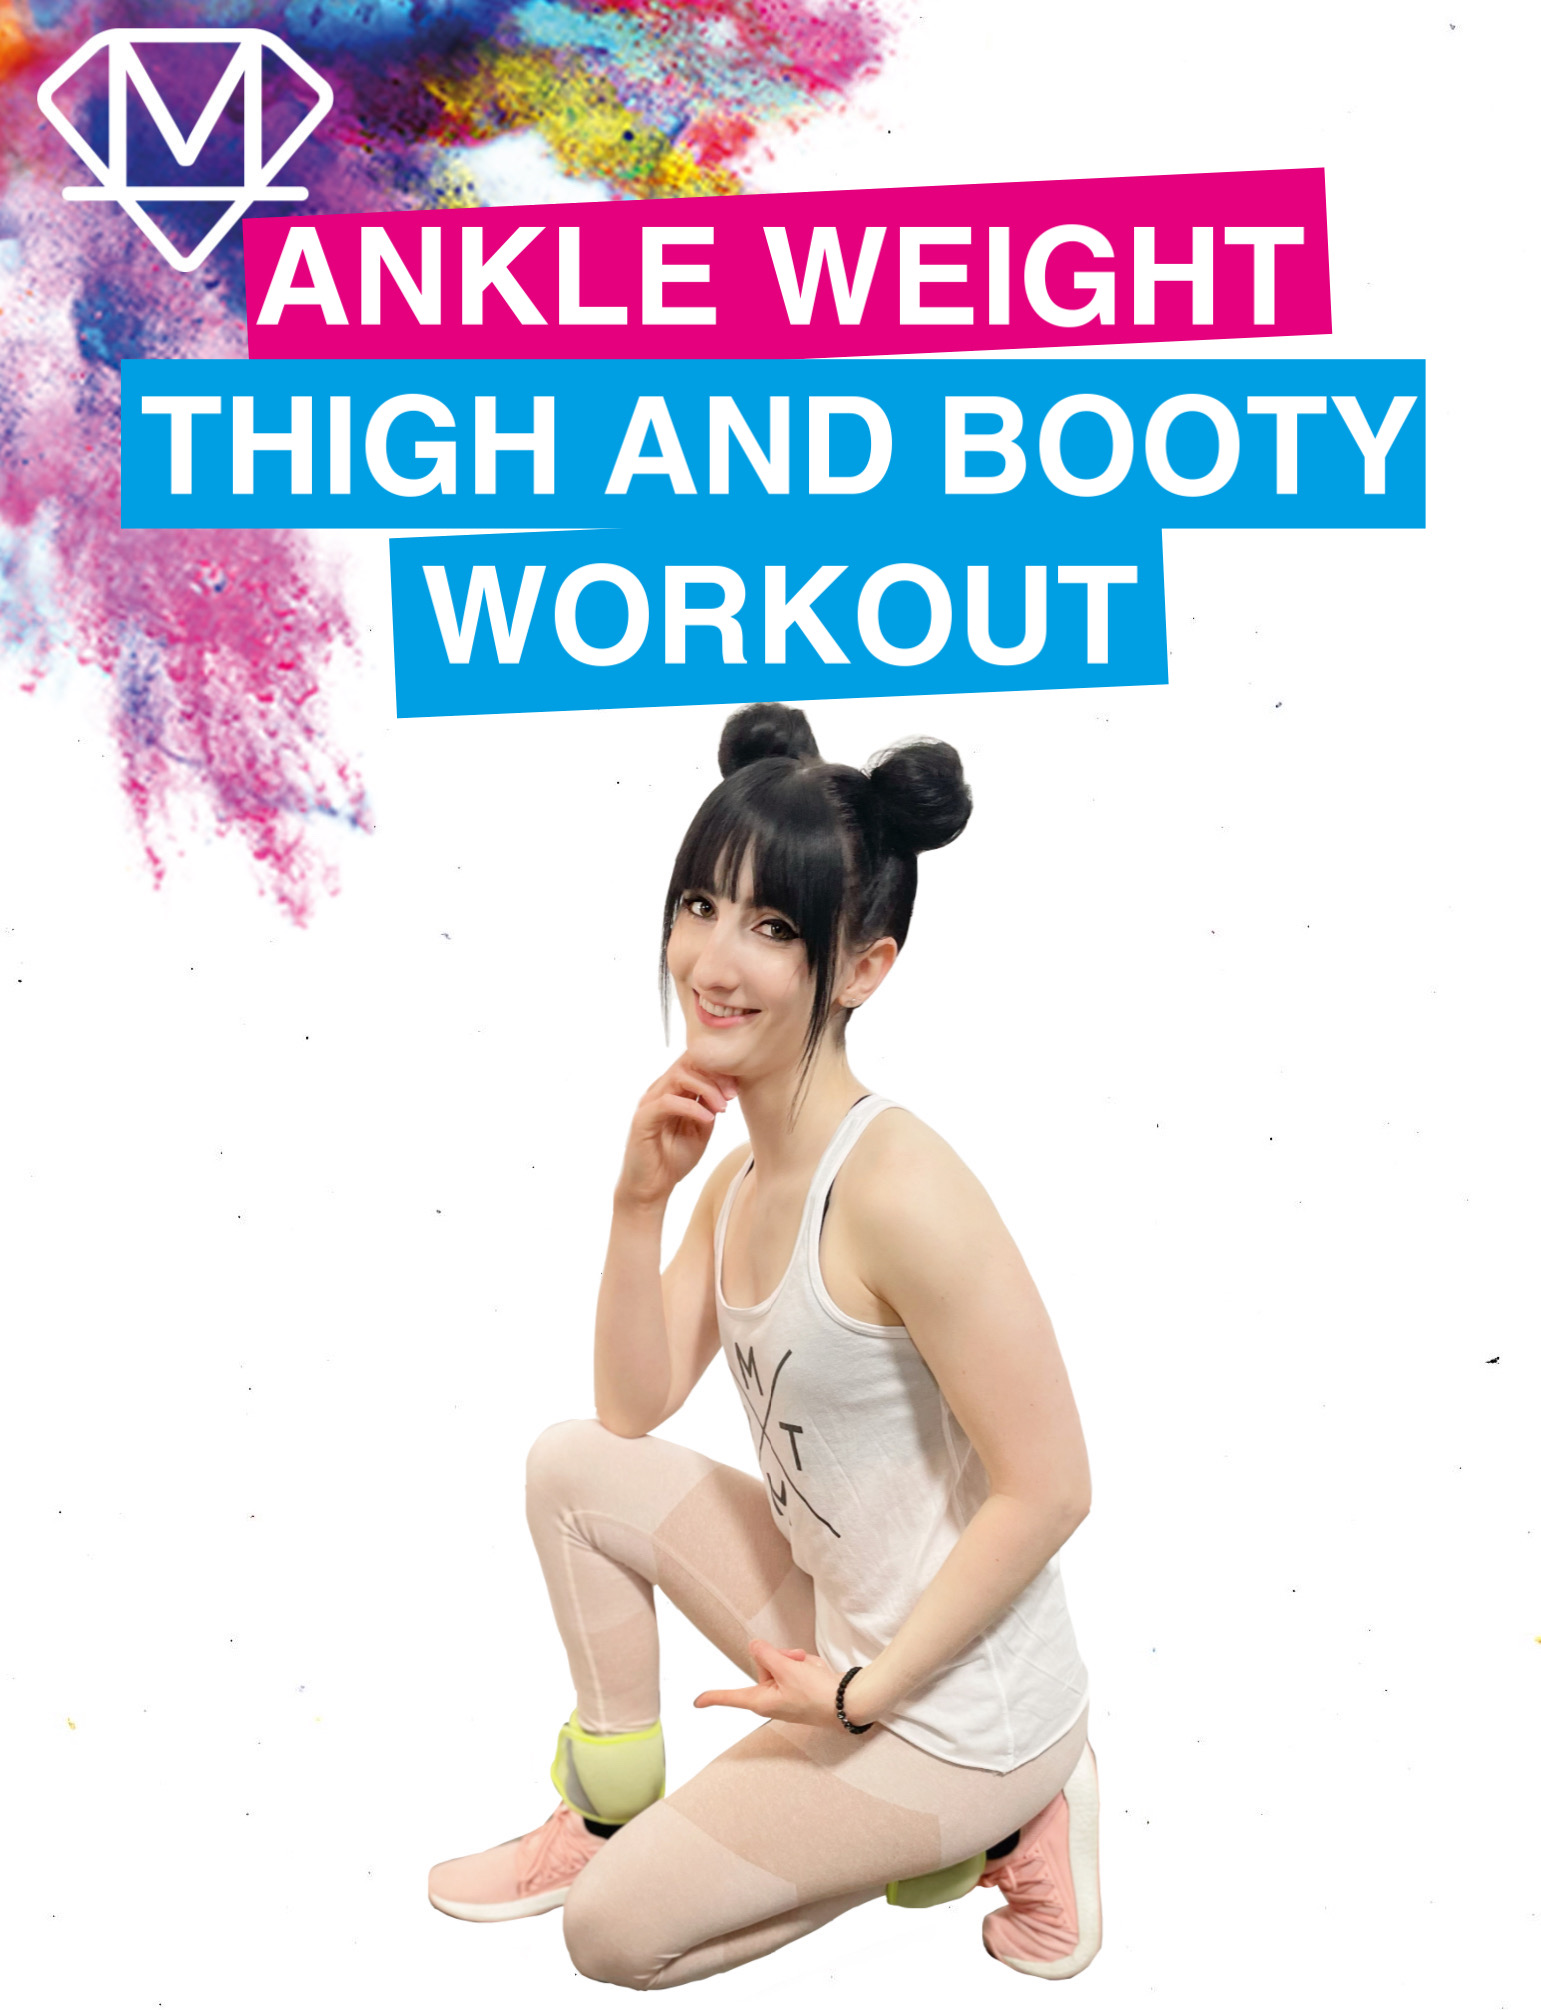 Ankle Weight Thigh and Booty Workout